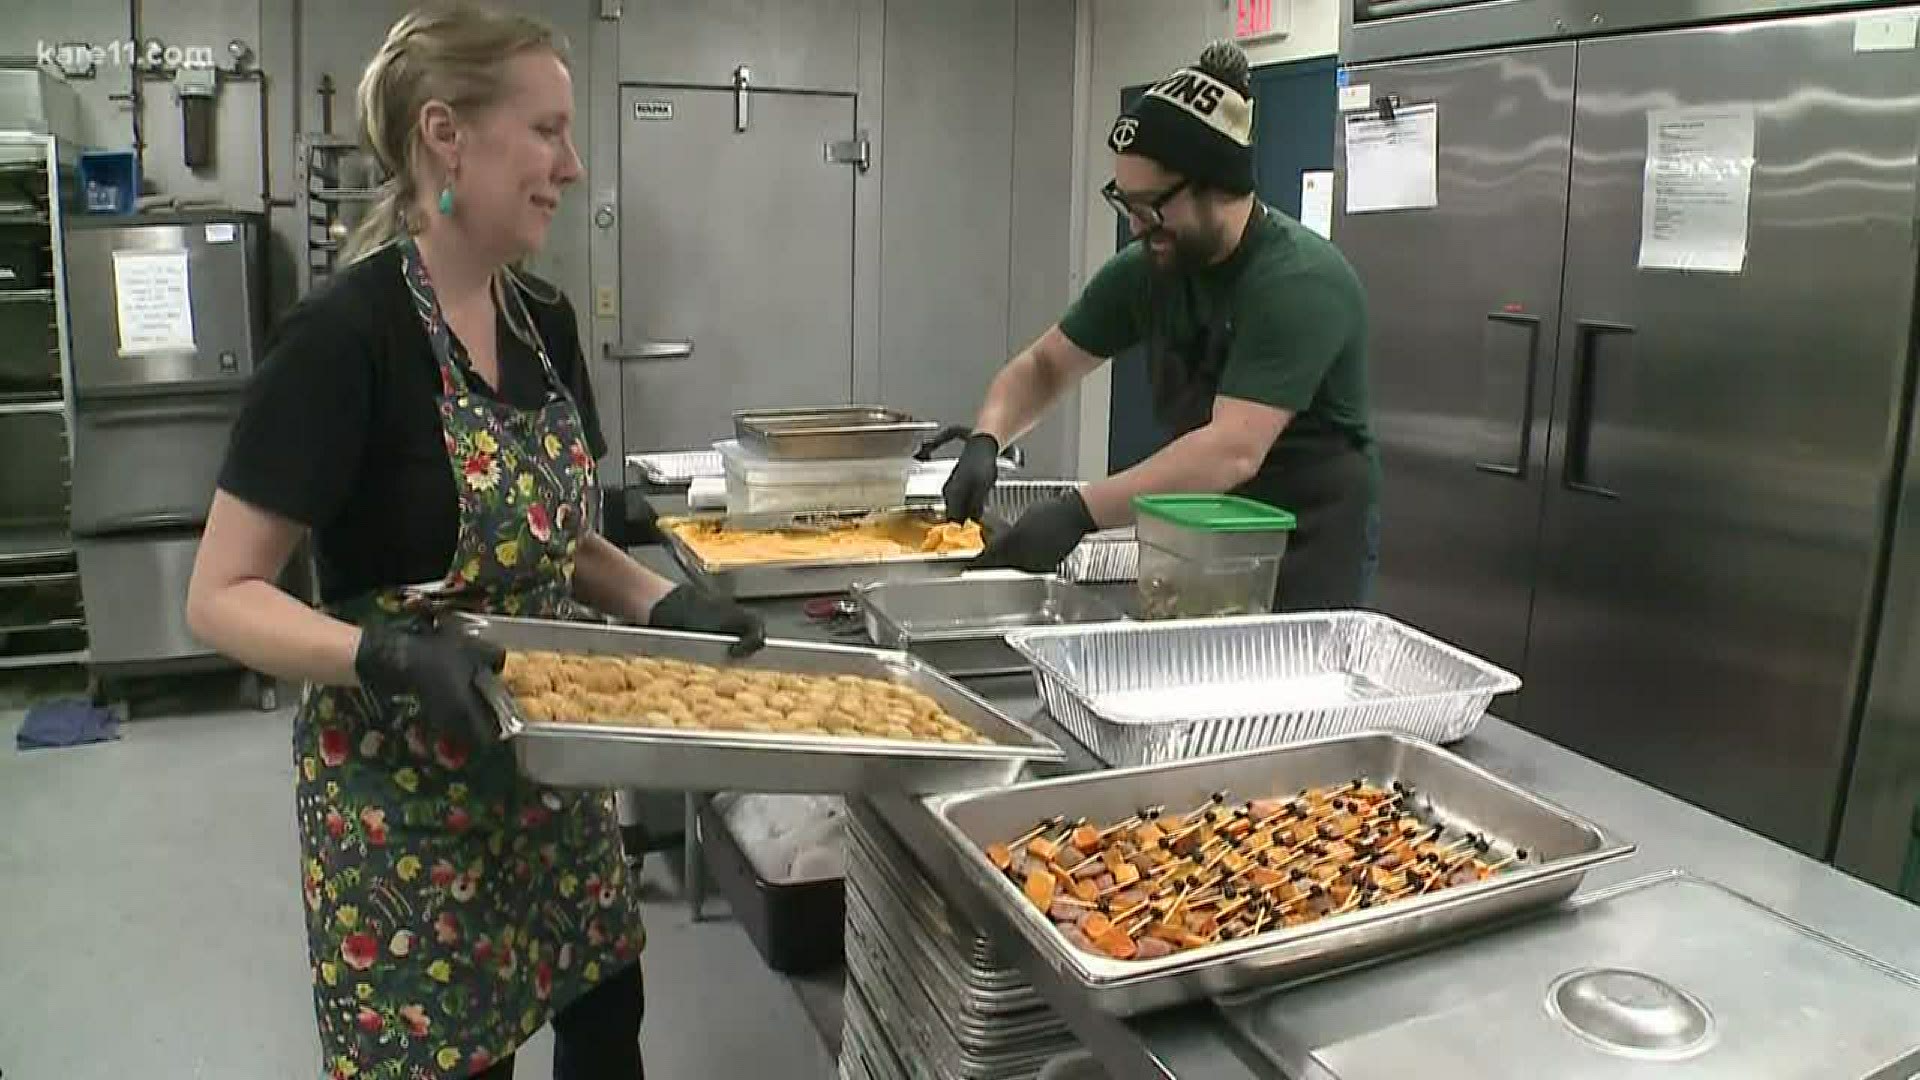 We have an update on Minnesota Central Kitchen -- which is now helping more than just families in need.